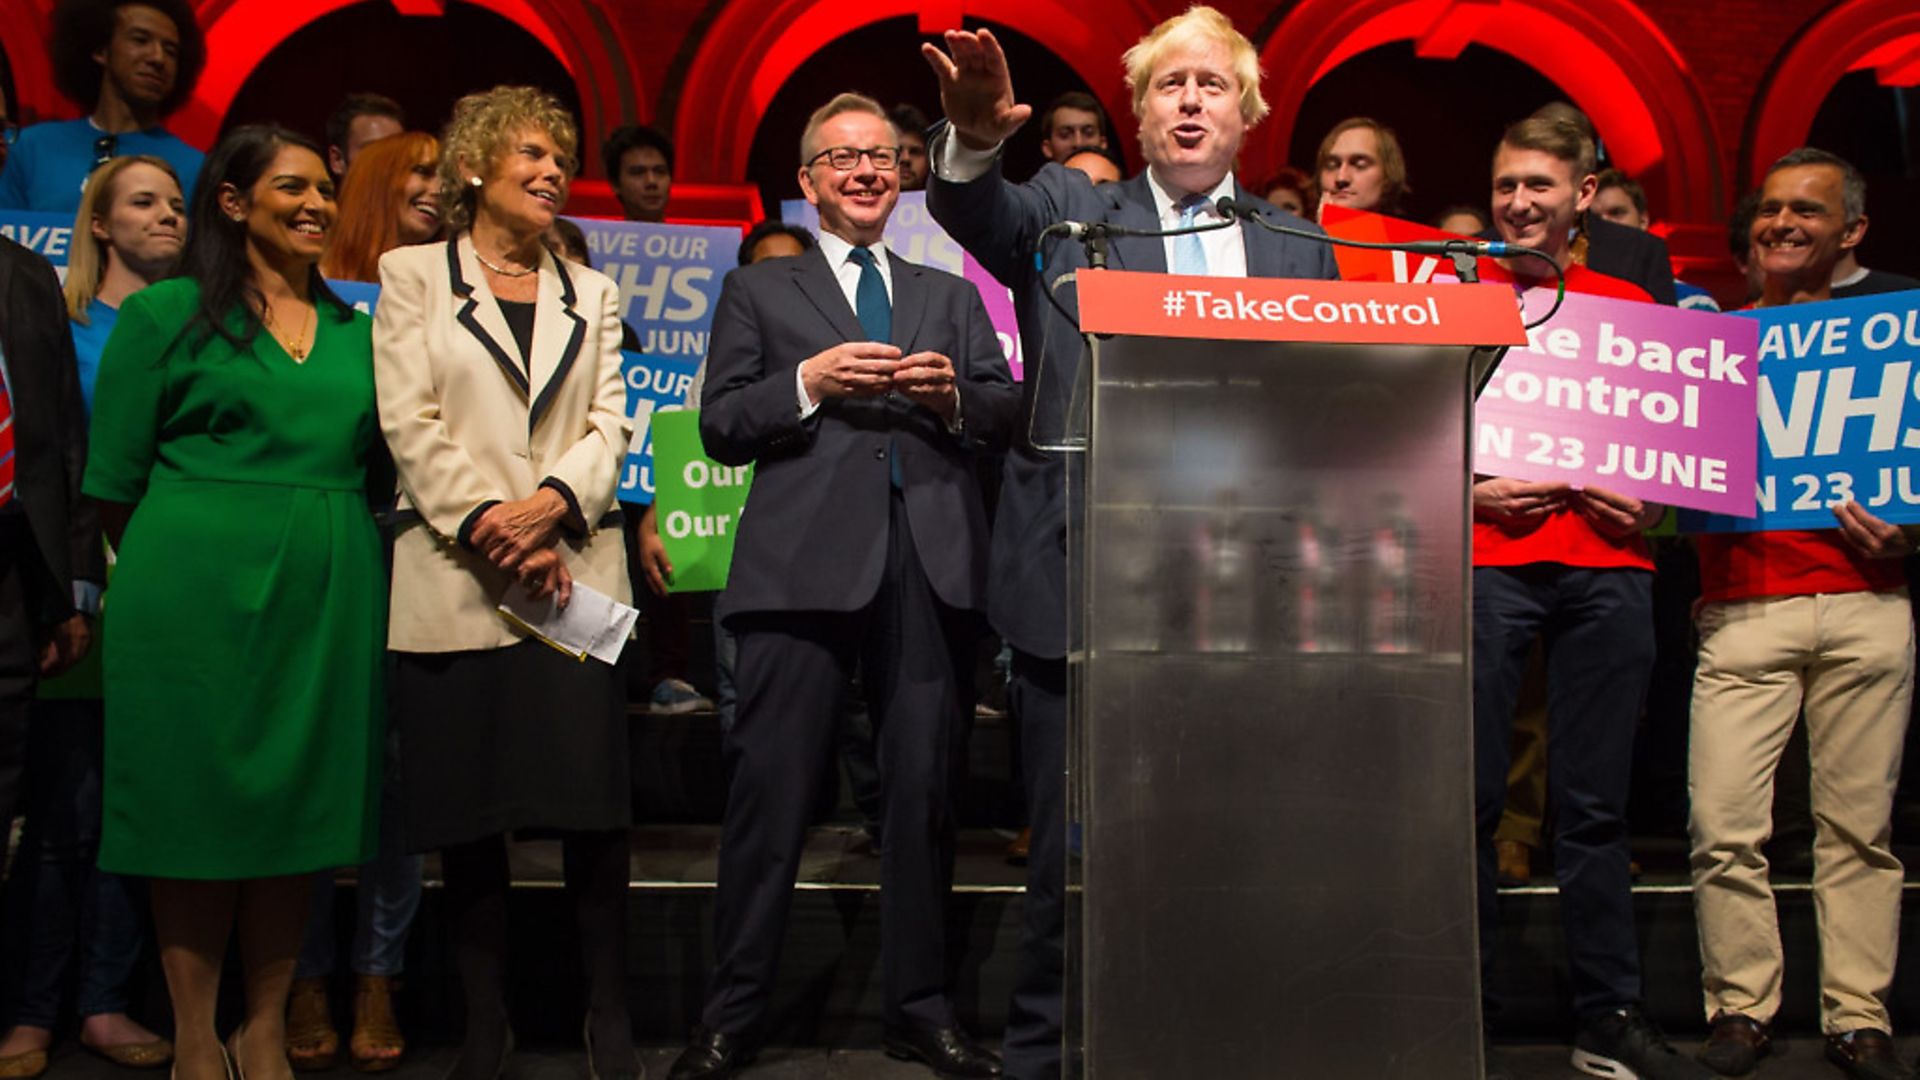 Boris Johnson (right) speaks alongside (from left to centre) Priti Patel, Kate Hoey and Michael Gove at a Vote Leave campaign event. Photograph: Dominic Lipinski. - Credit: PA Archive/PA Images